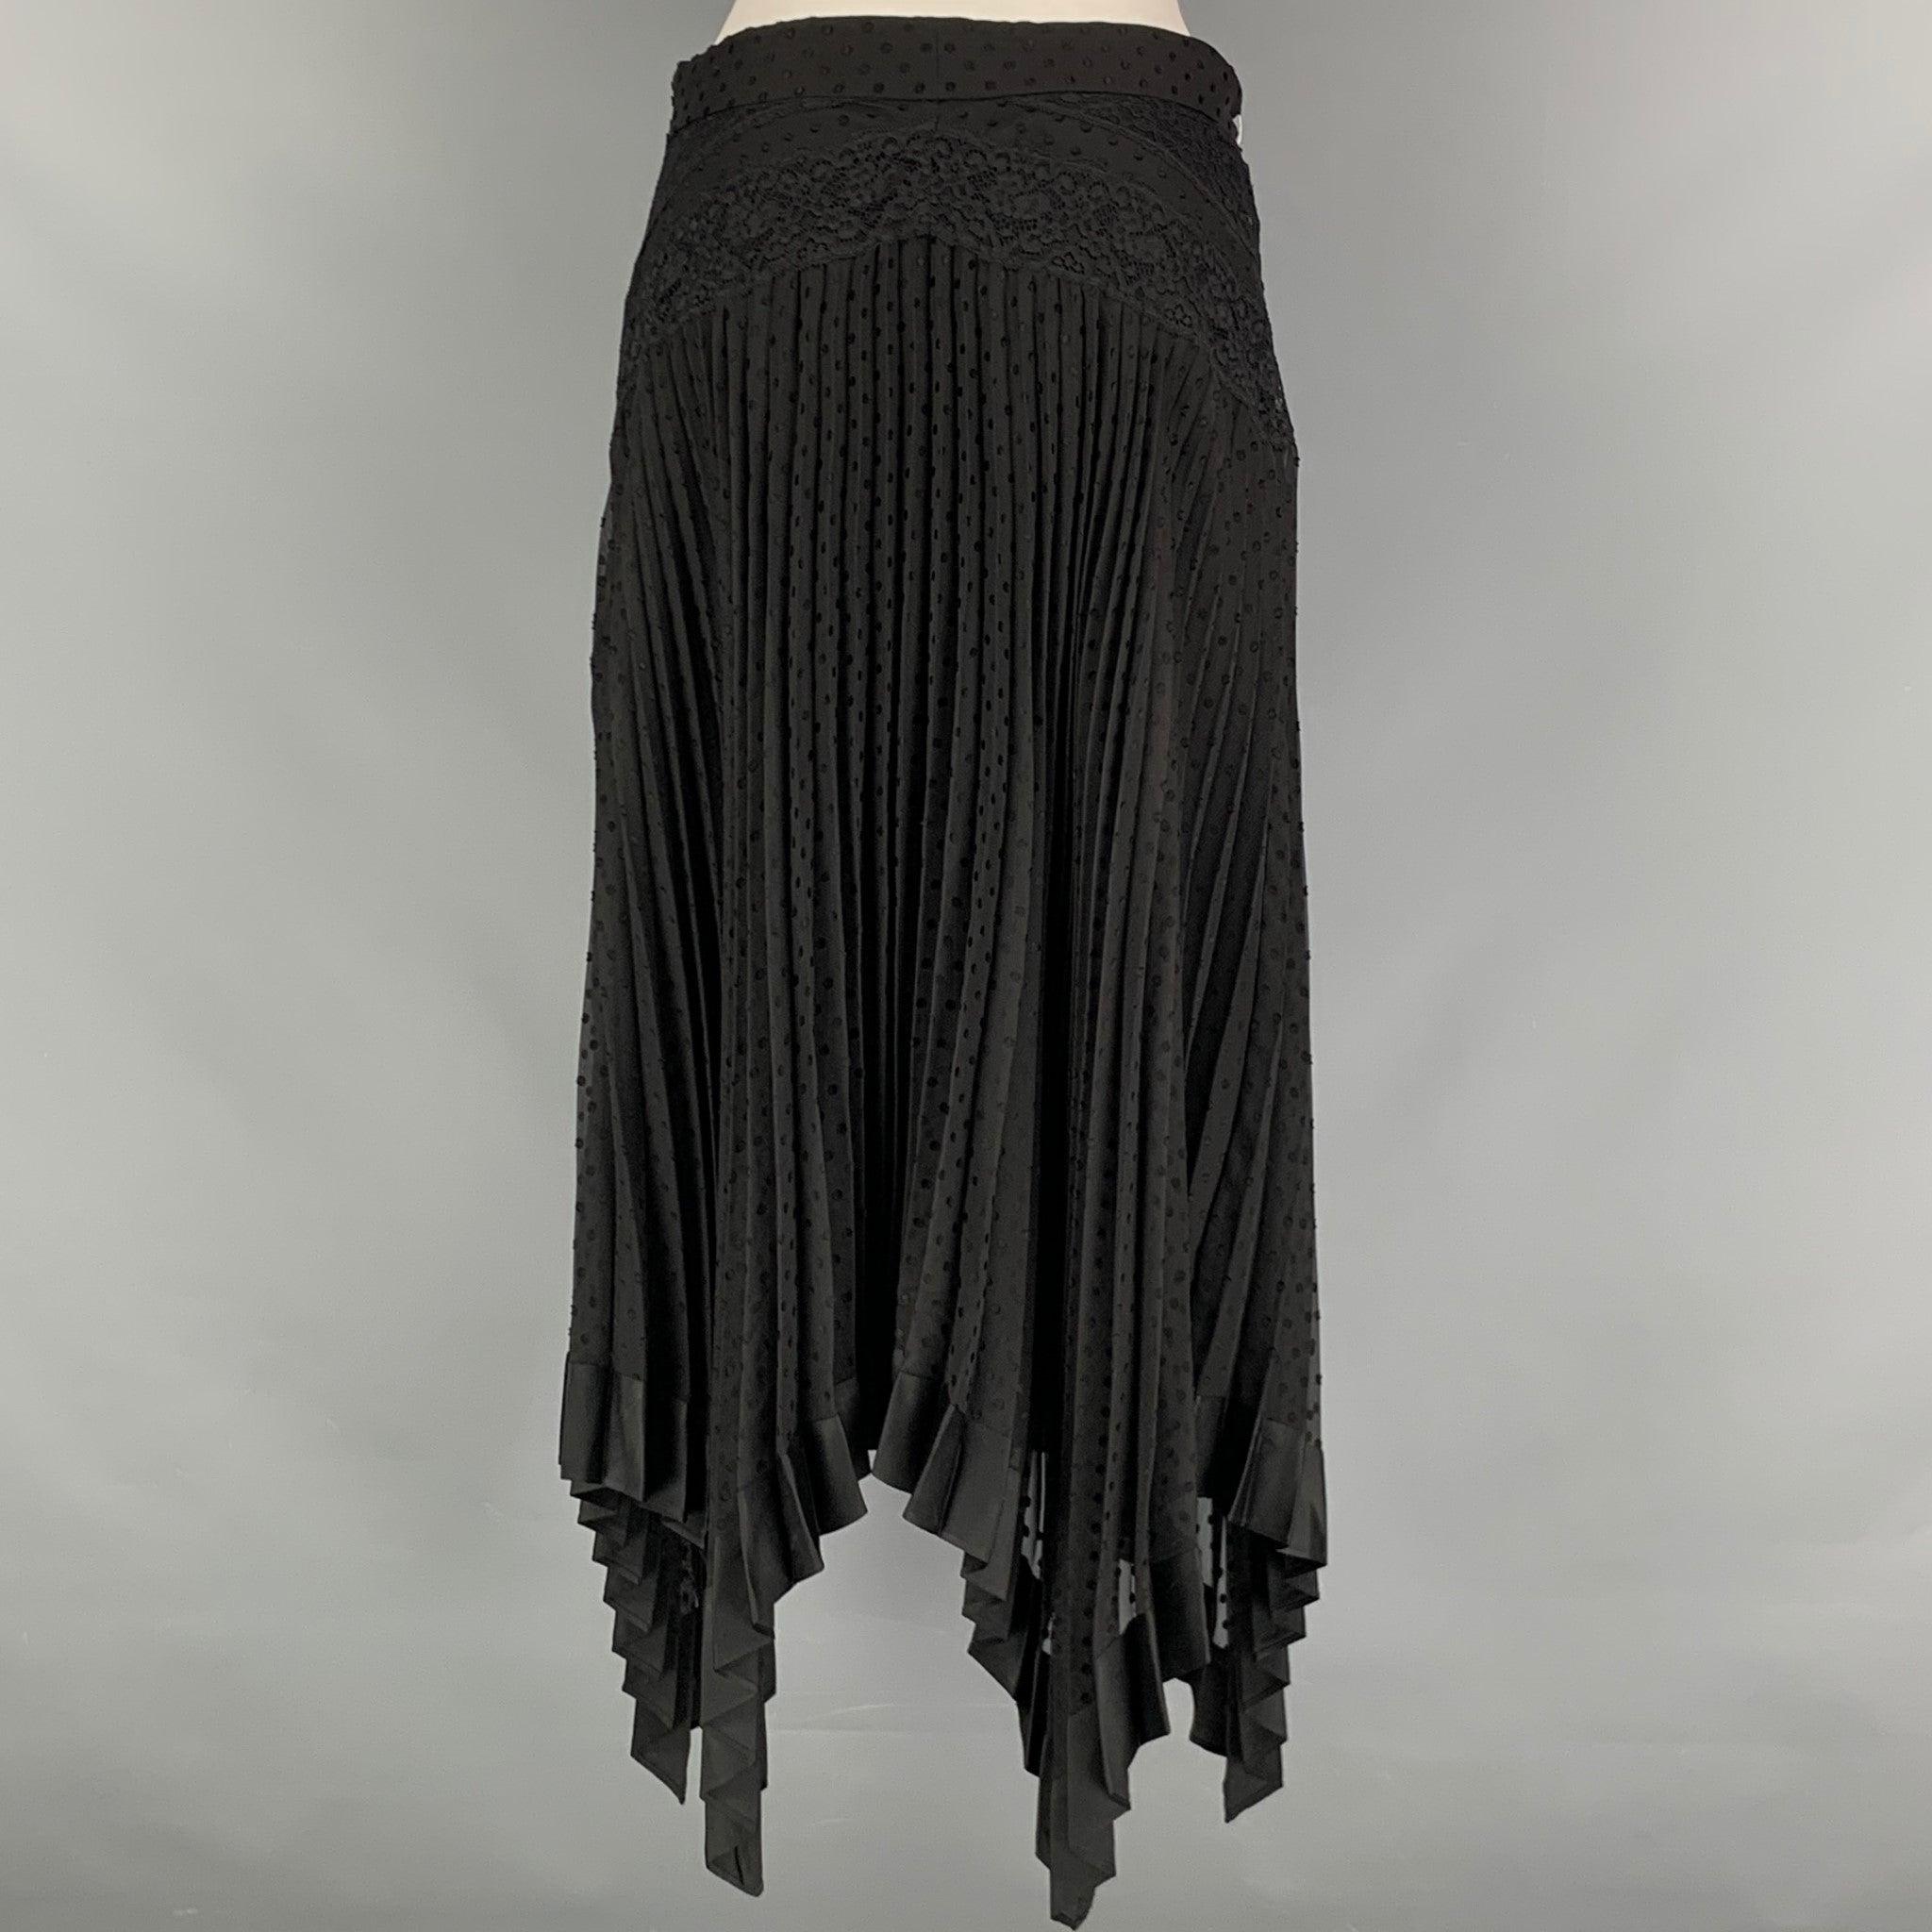 ZIMMERMANN skirt comes in a black viscose and polyester polka dot woven material features an A-line silhouette, asymmetrical pointed front, lace detail at waist and pleated style. Made in Italy.Excellent Pre-Owned Condition. 

Marked:   2